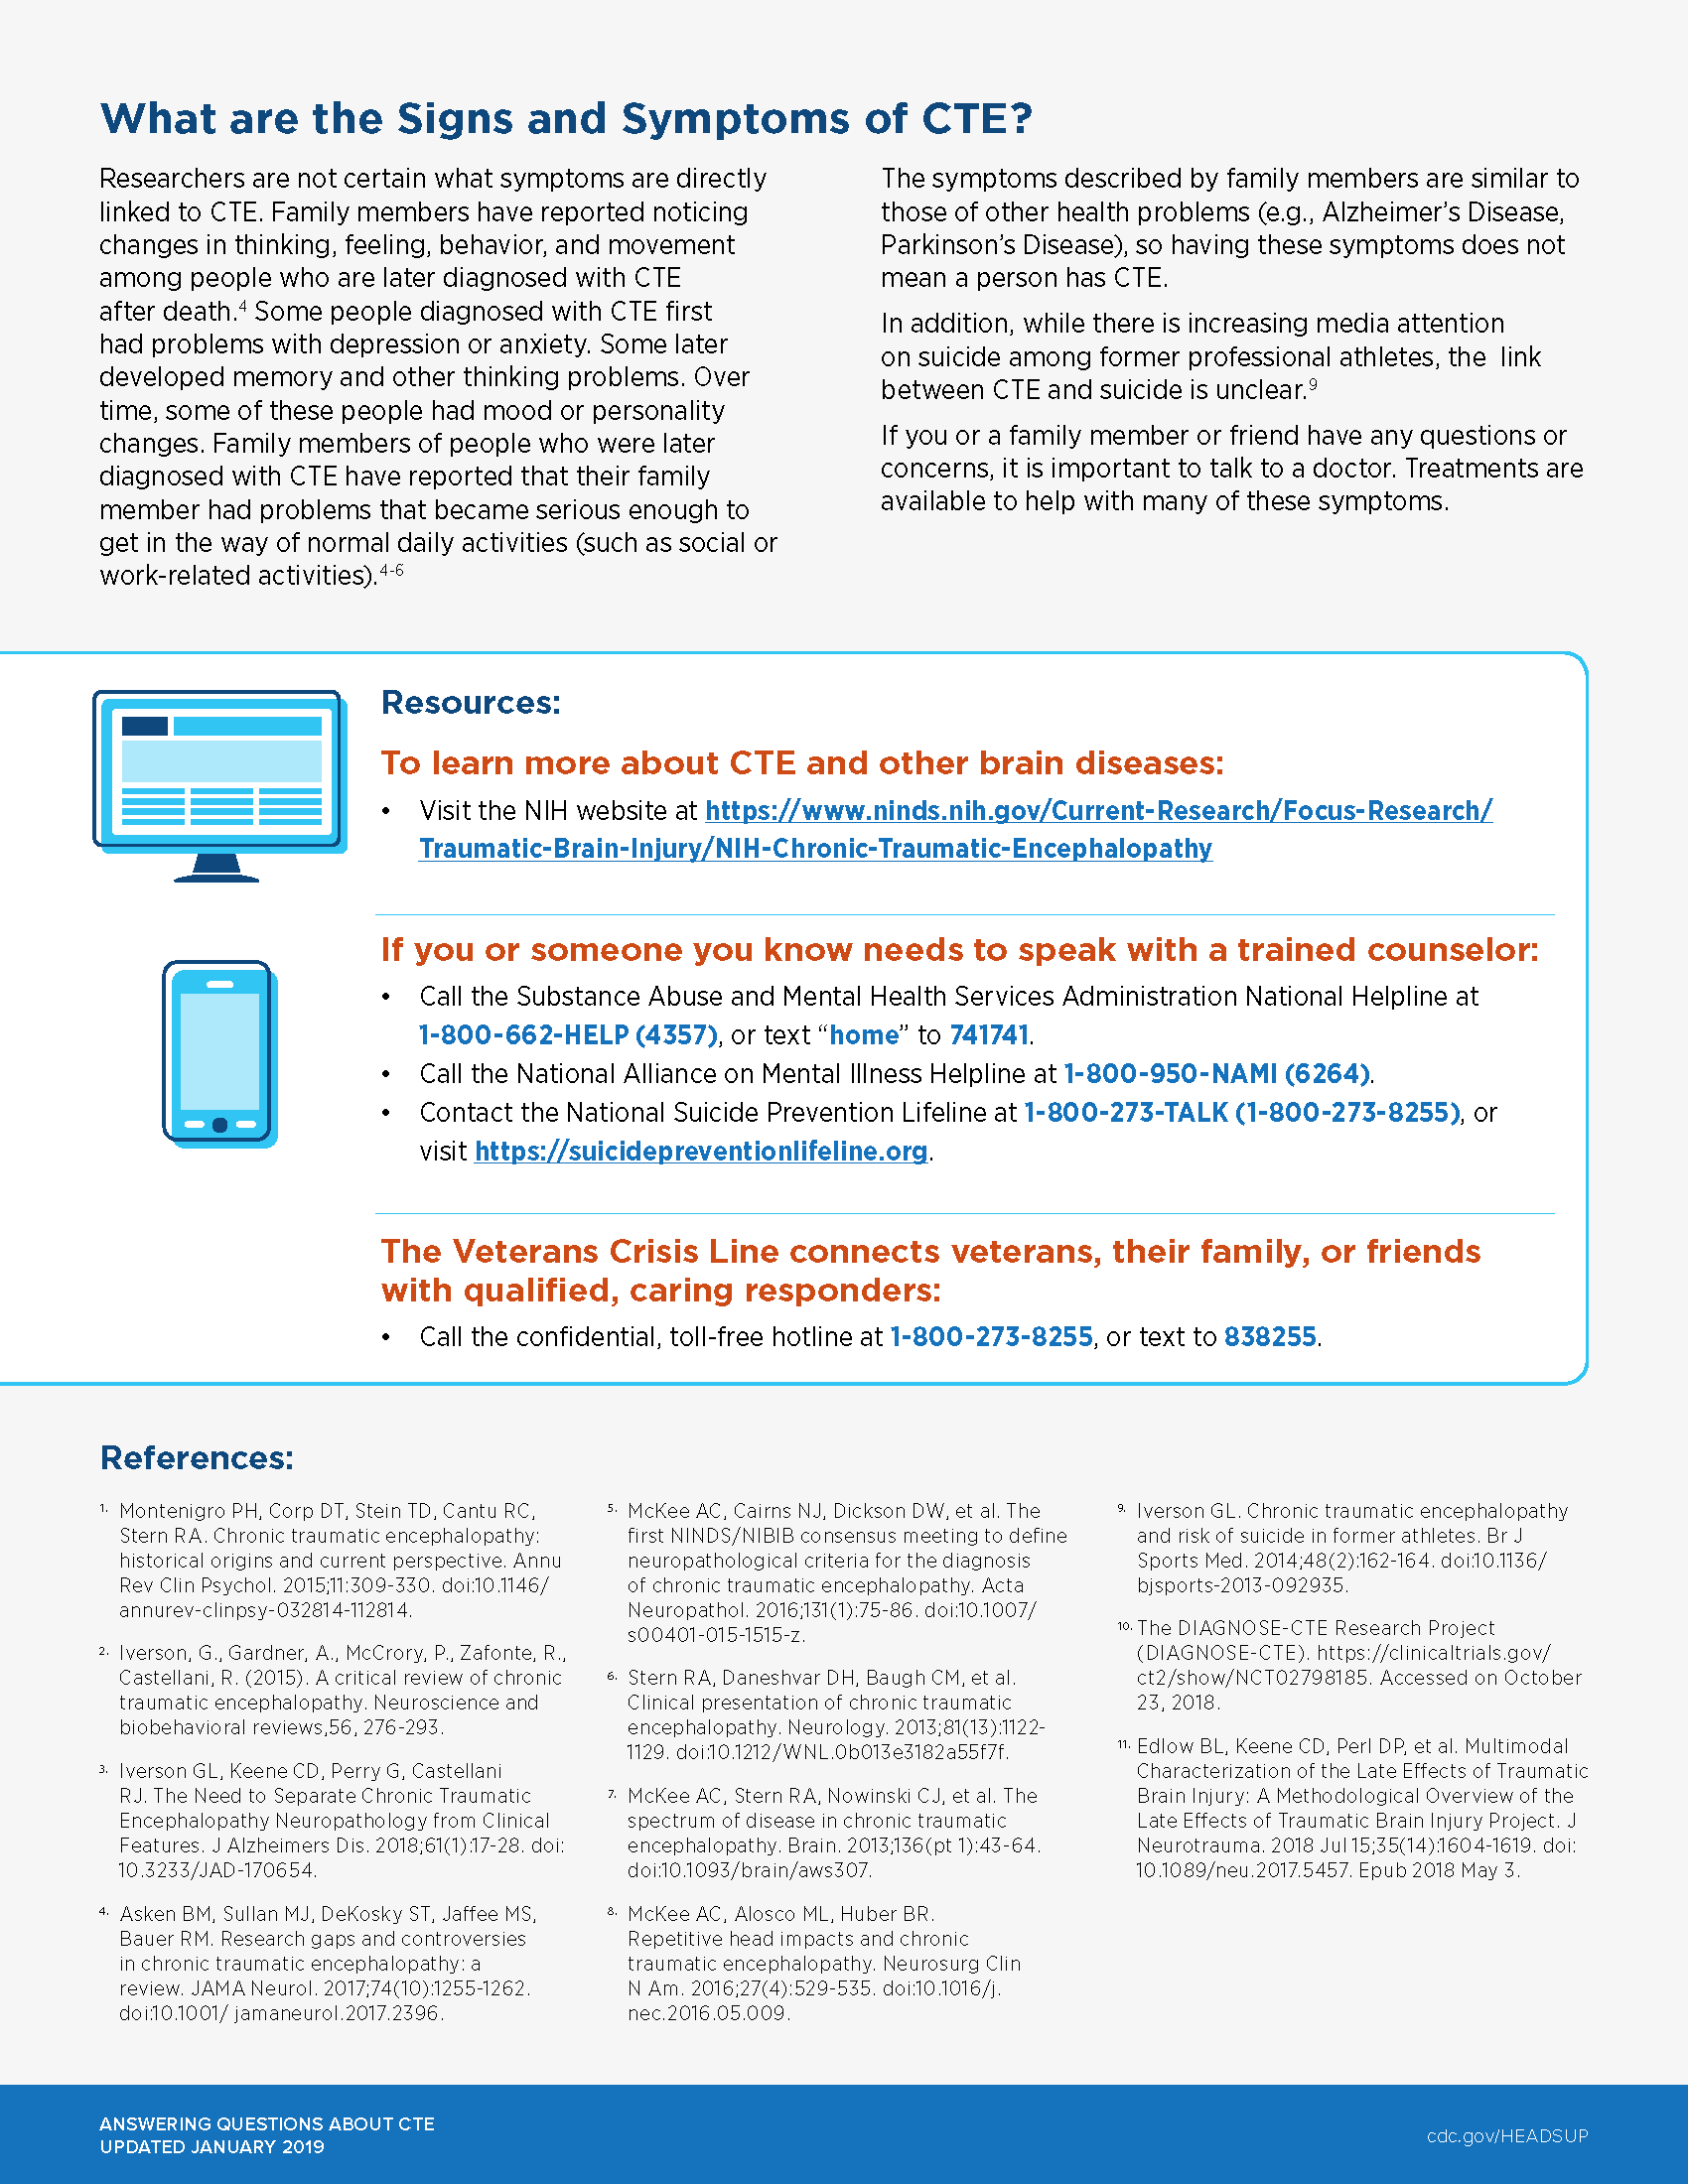 Page two of the CTE Factsheet from the CDC